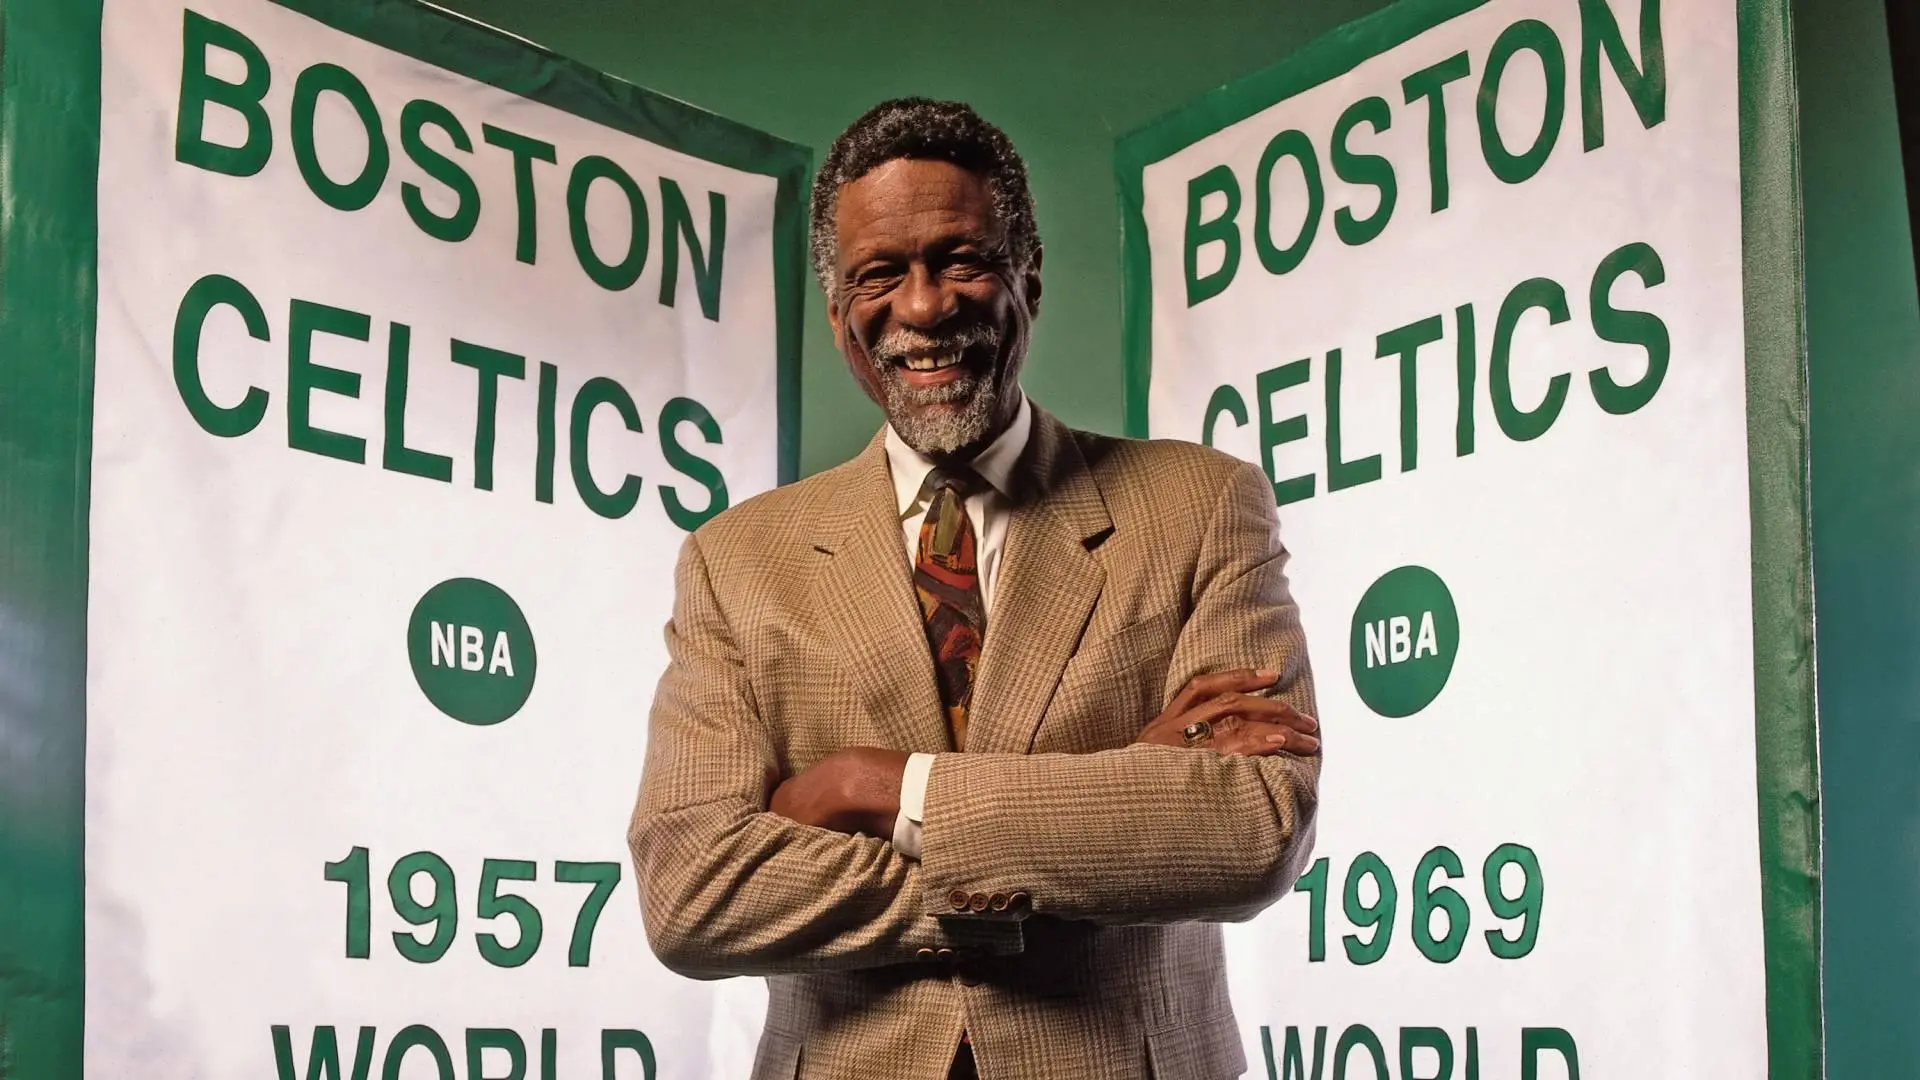 Bill Russell NBA championship rings photo recreated by Ballon D'or winner Leonel Messi